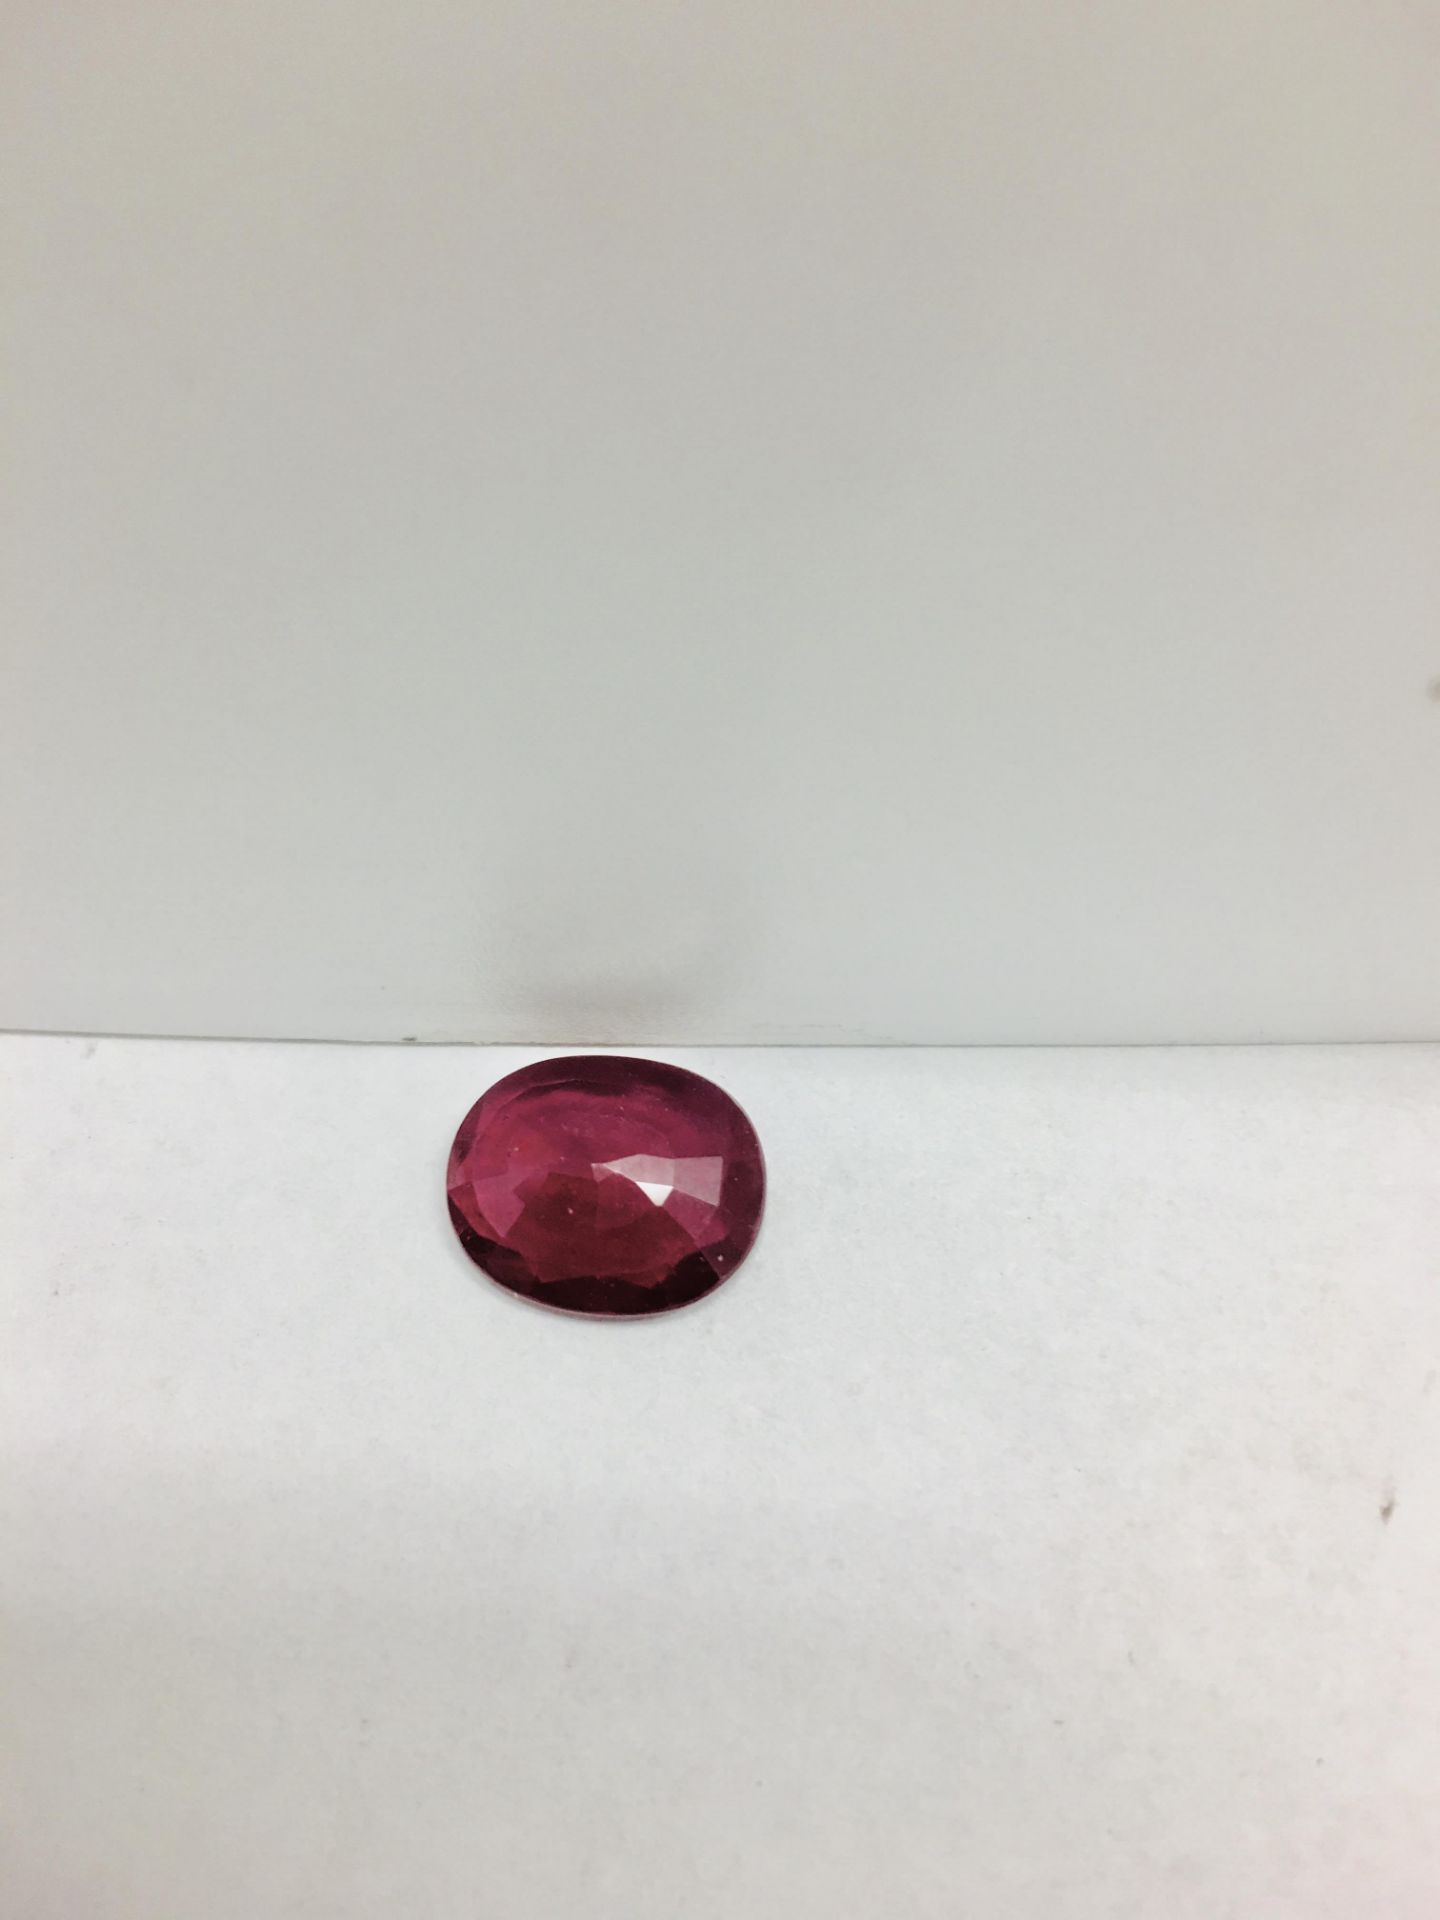 4.90ct ruby,Enhanced by Frature,good clarity and colour,12mmx10mm ,valued at 800 - Image 2 of 3